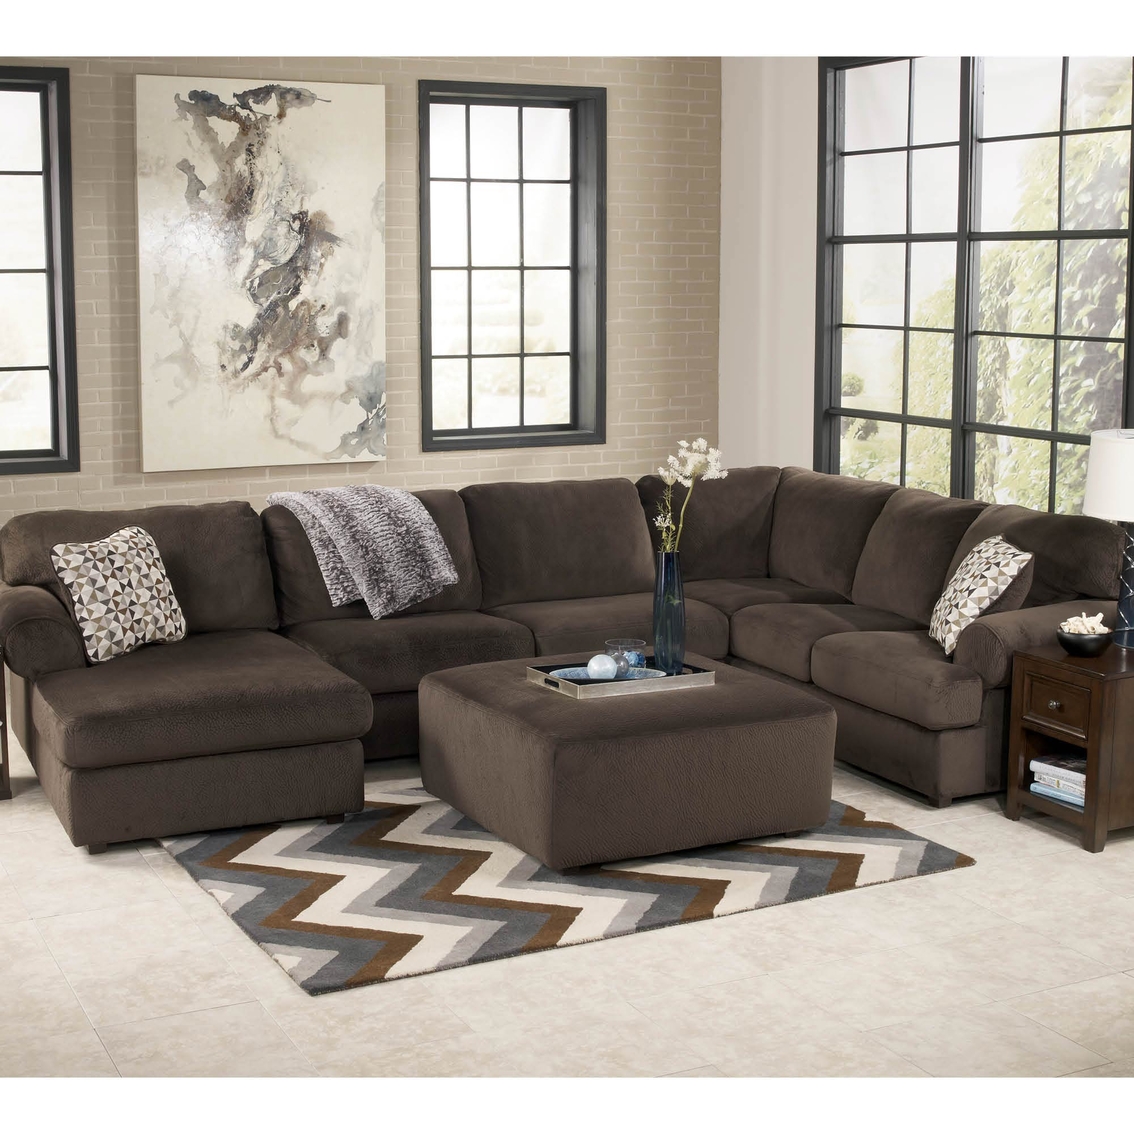 Signature Design by Ashley Jessa Place 3 pc. Sectional Sofa - Image 2 of 3